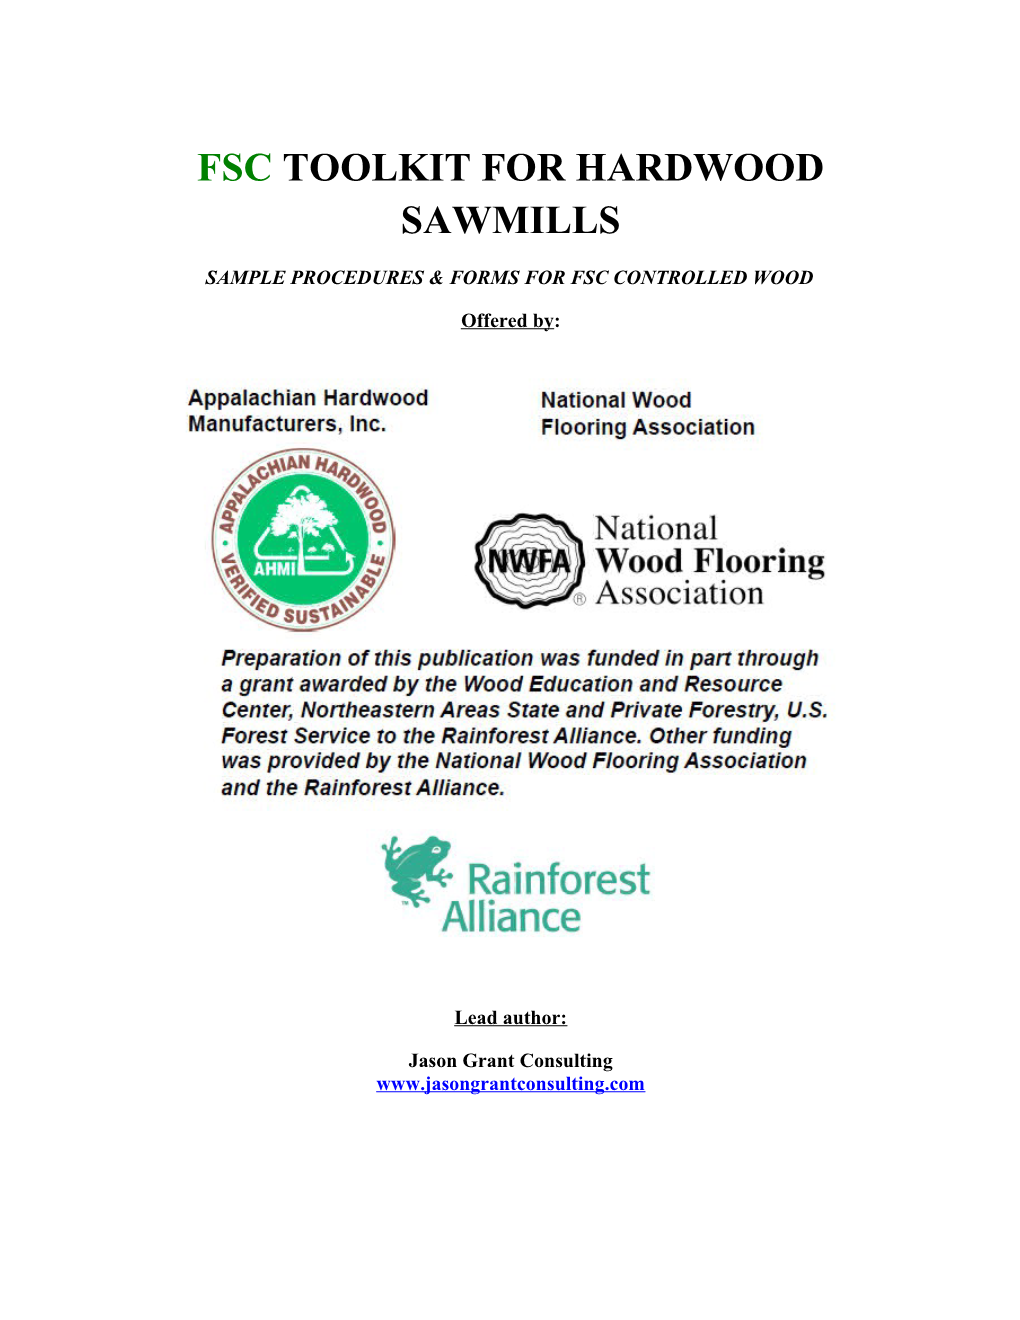 Sample Procedures & Forms for Fsc Controlled Wood